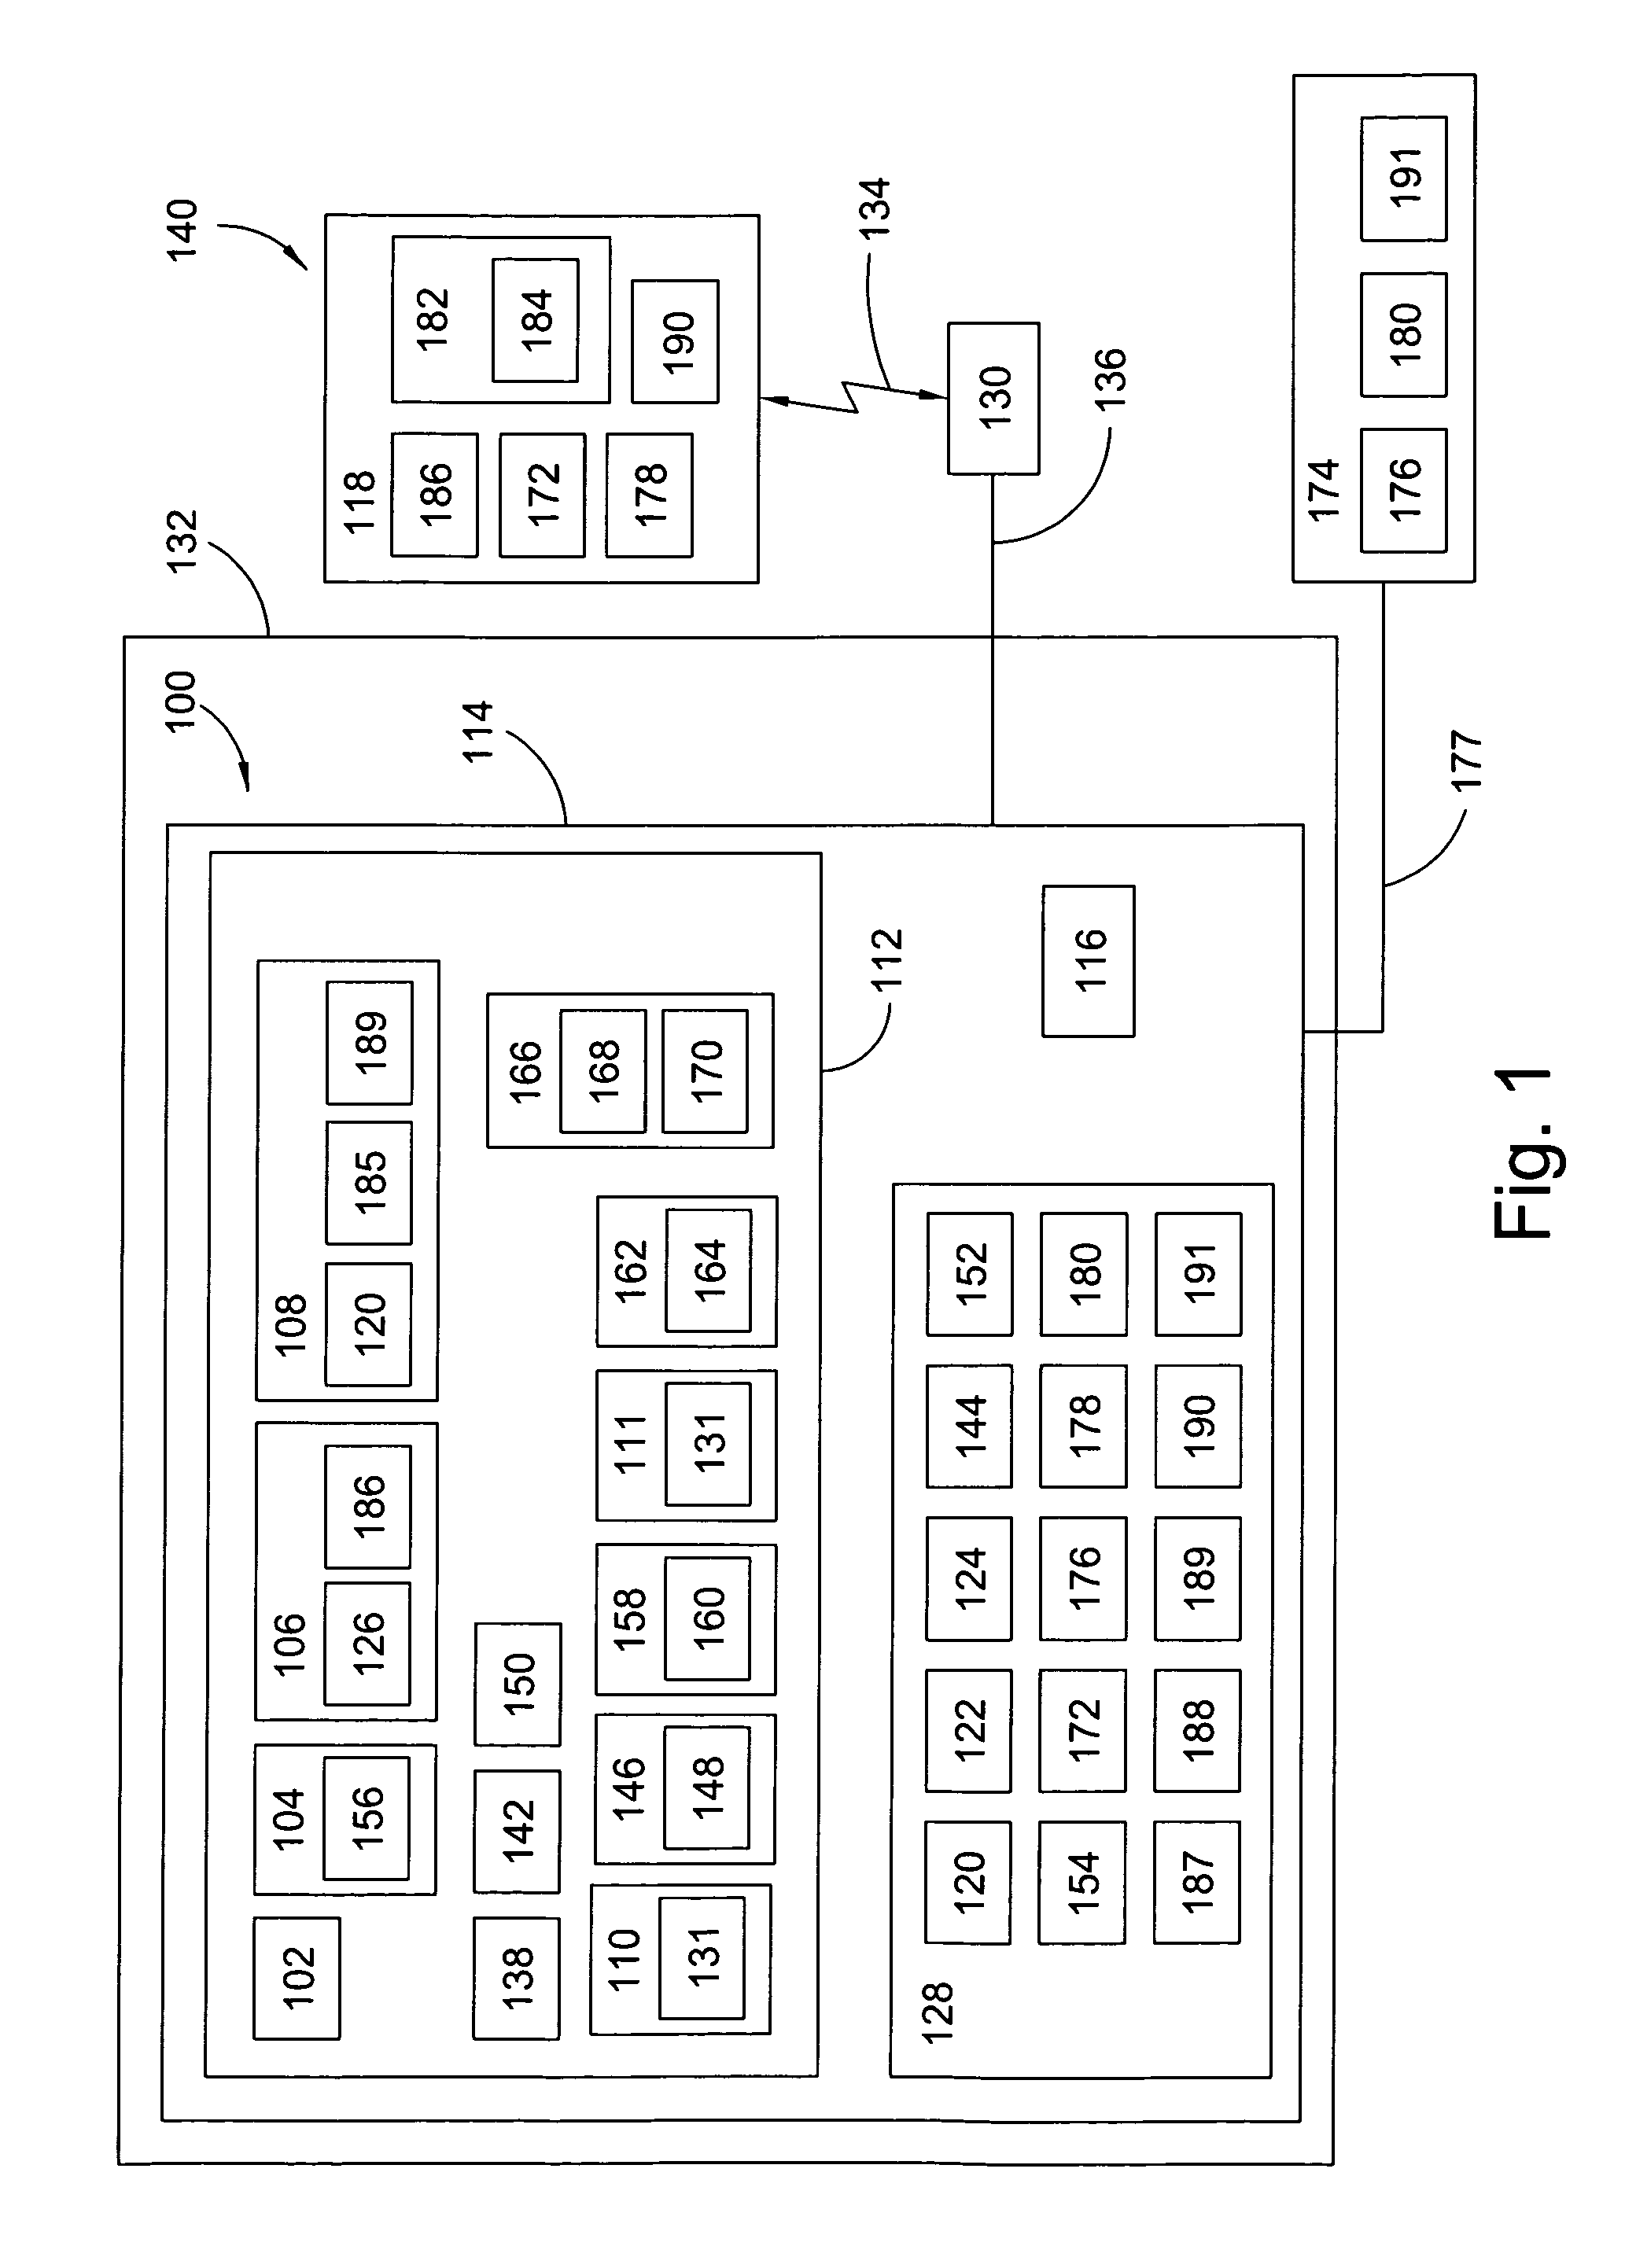 System and method for location based suggestive selling